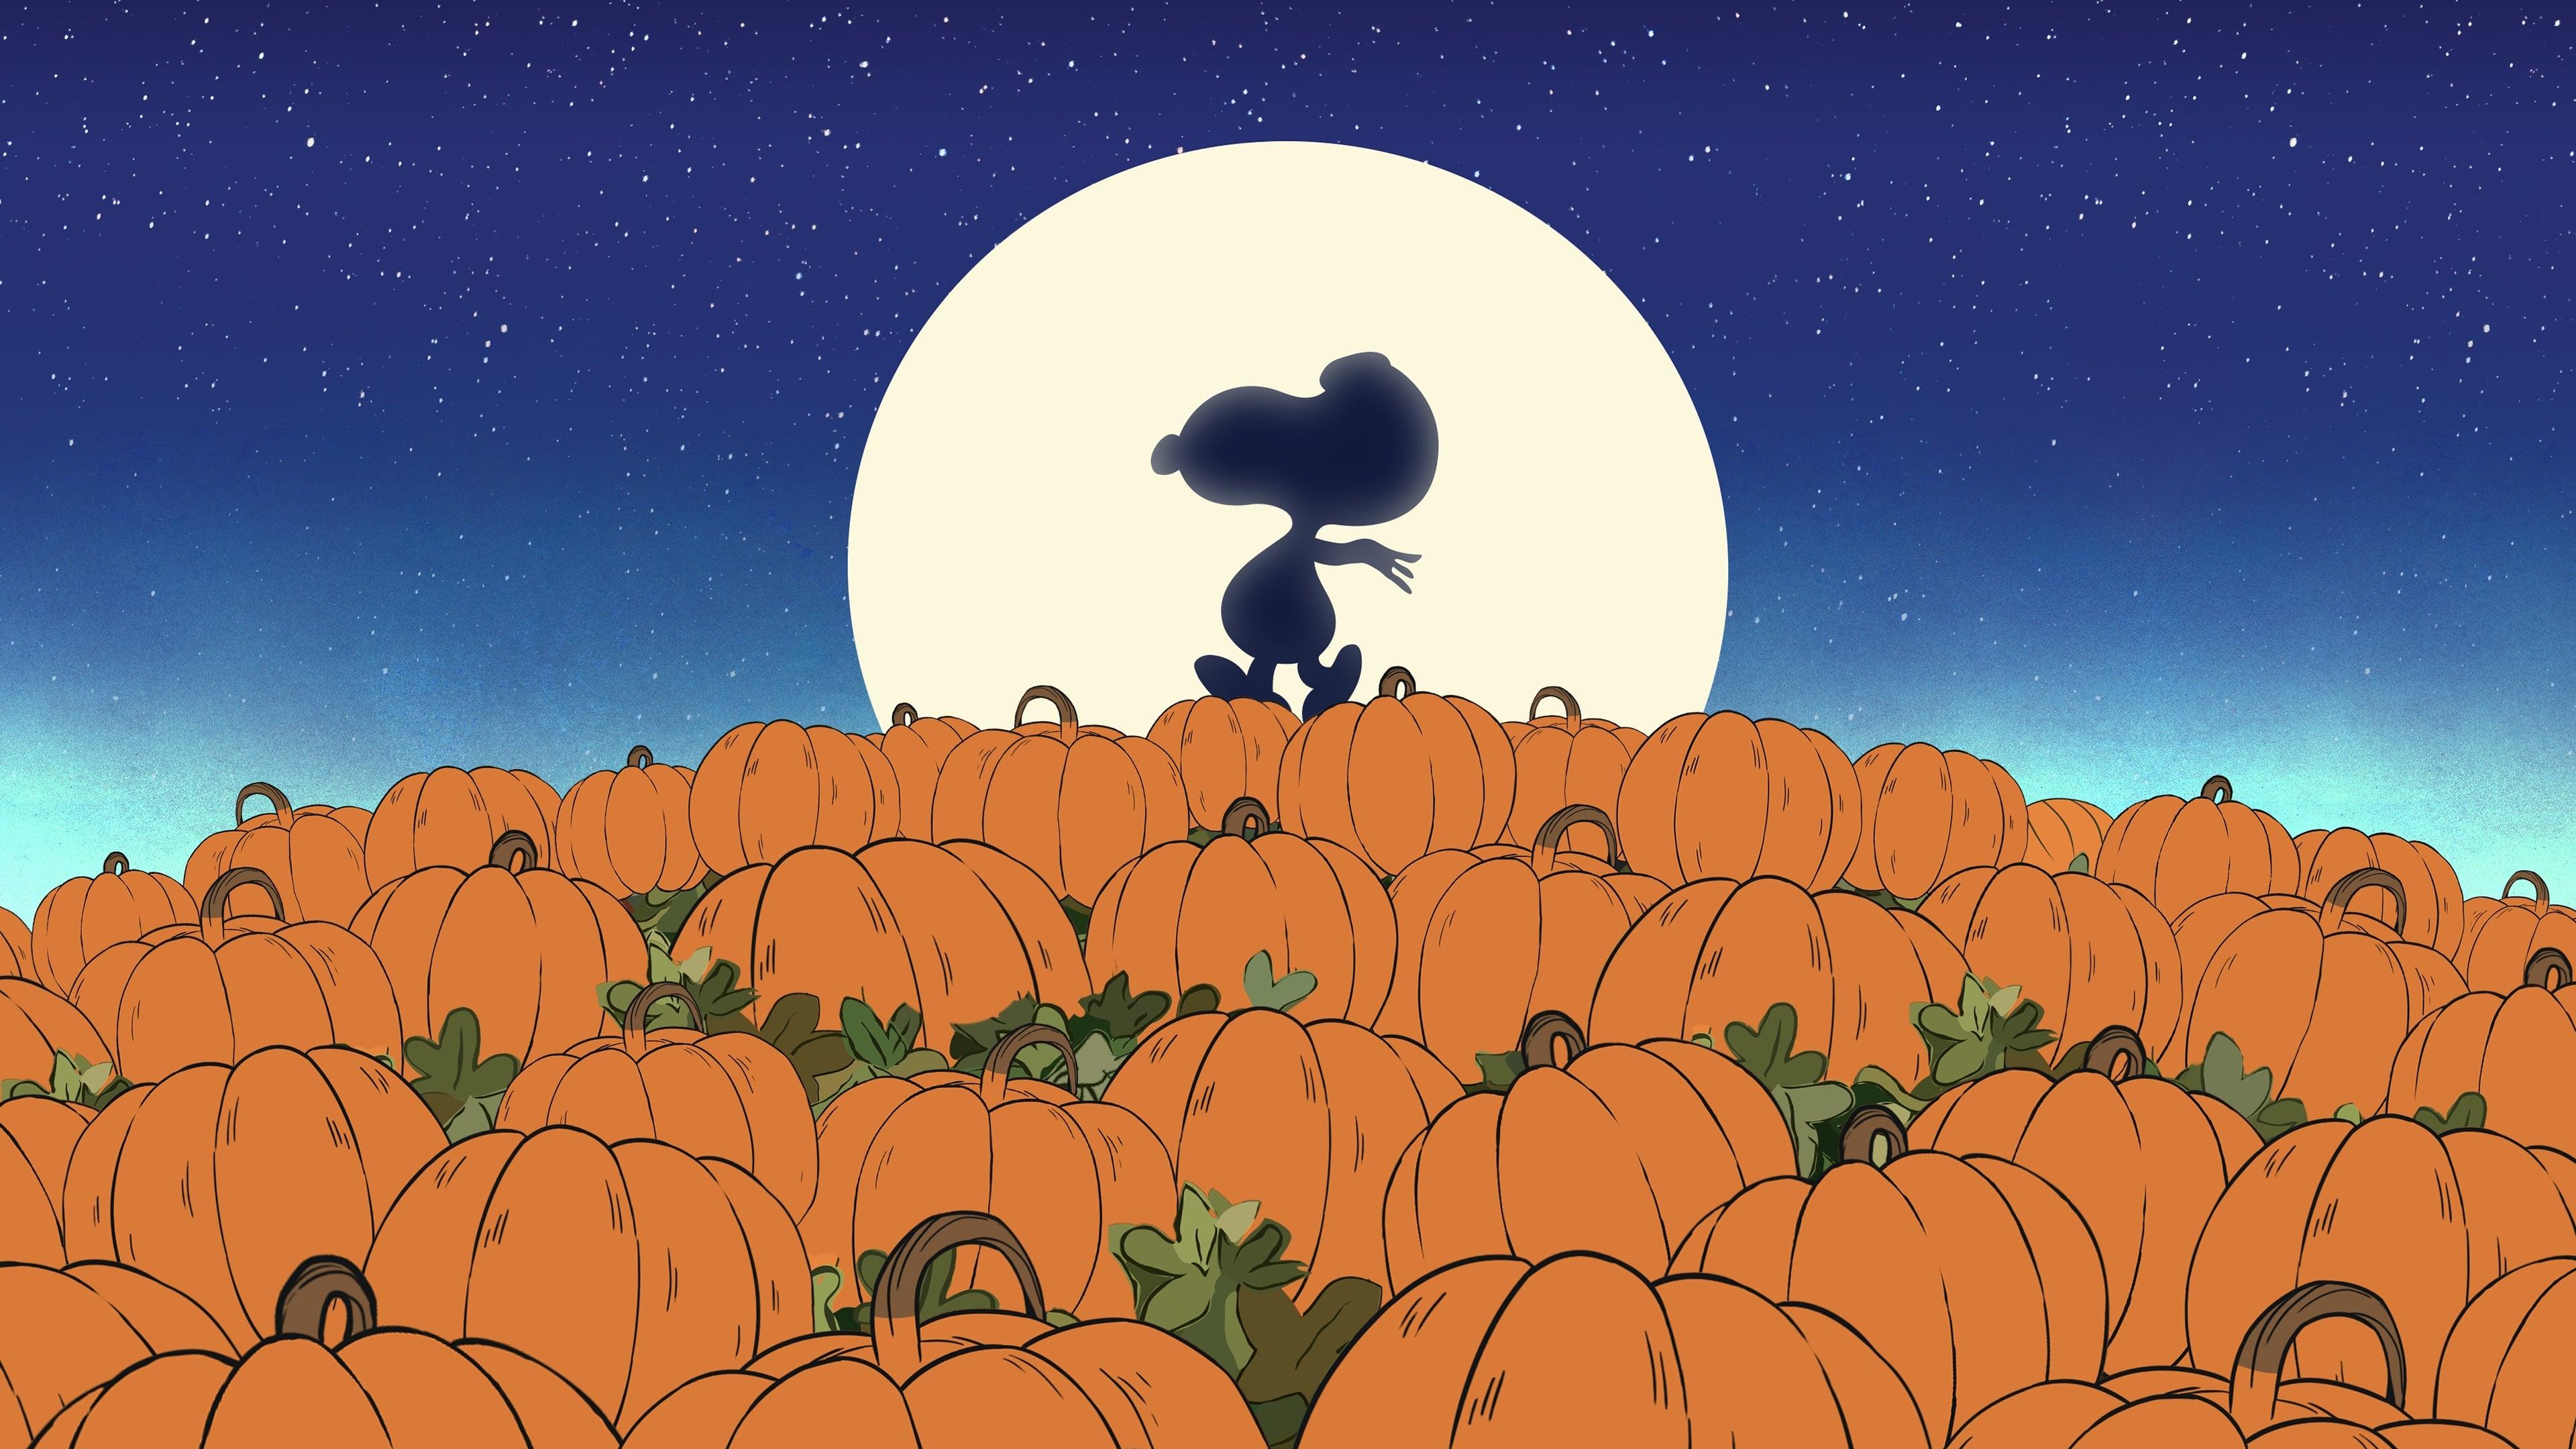 It's the Great Pumpkin, Charlie Brown backdrop